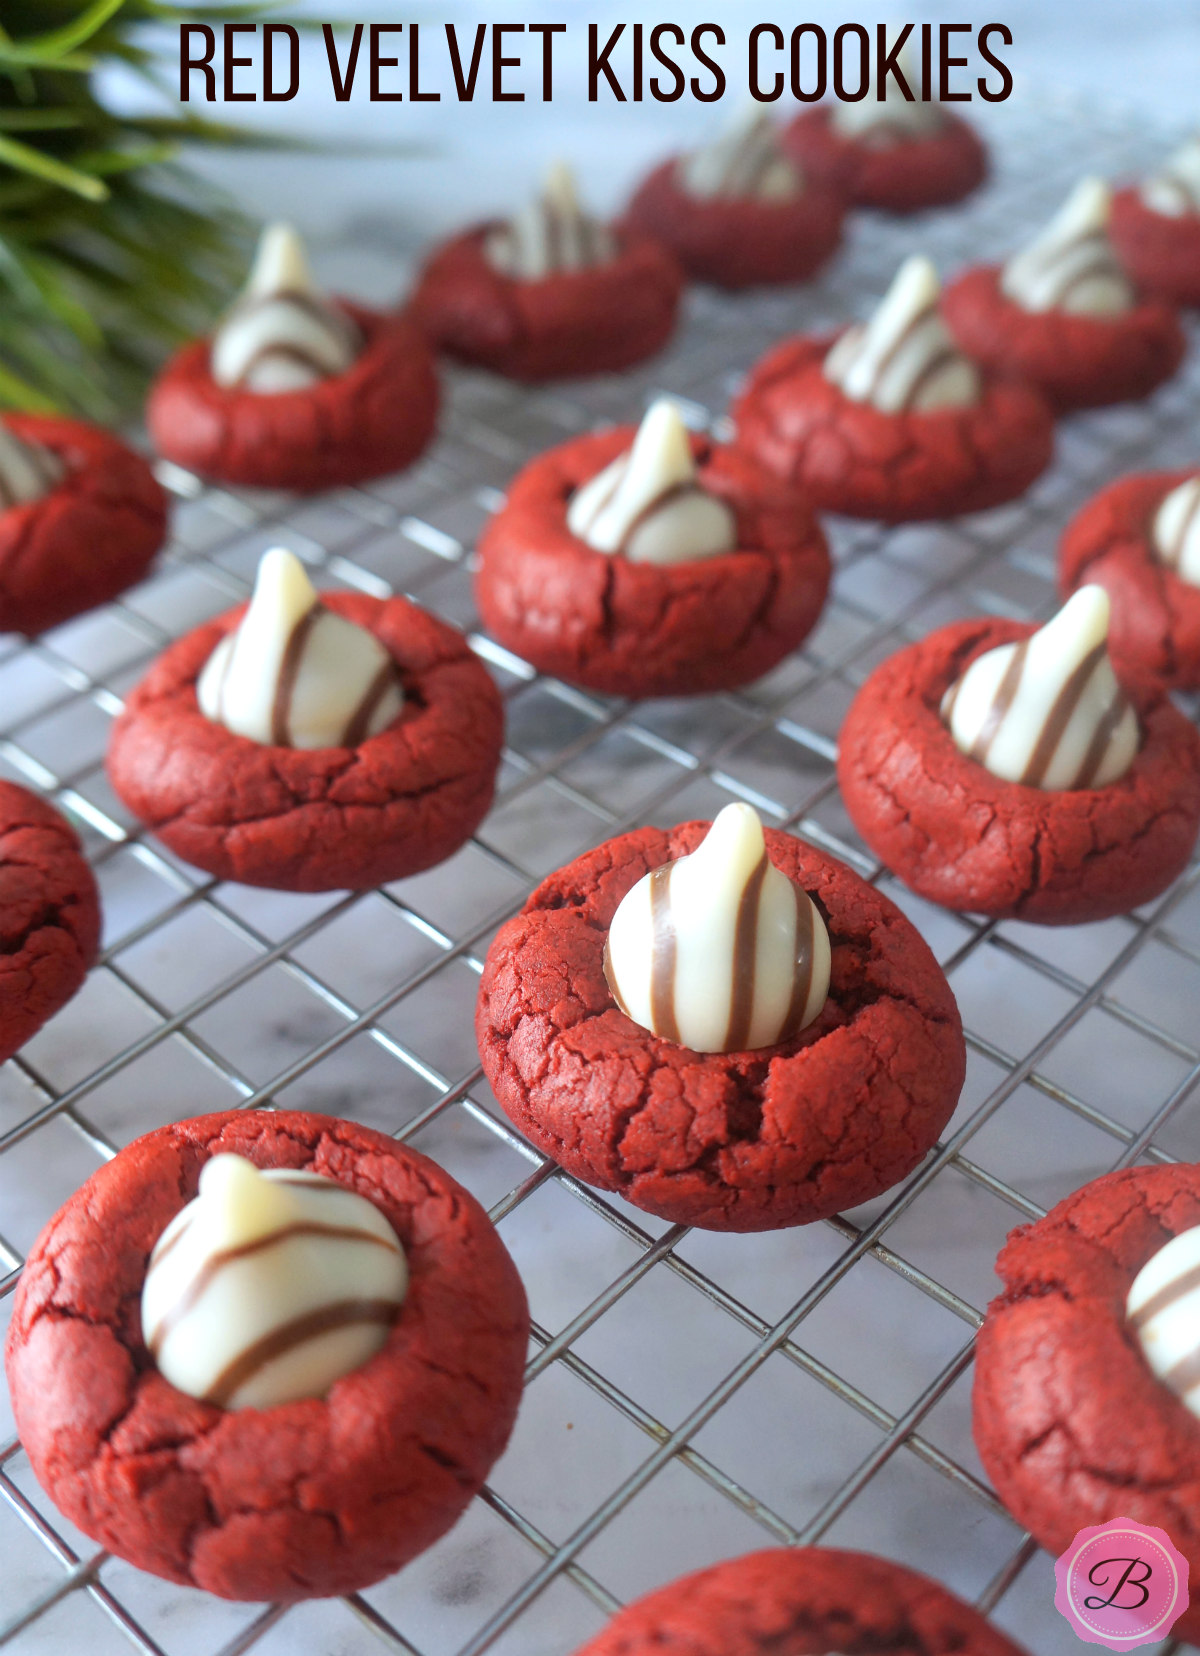 Red Velvet Kiss Cookies with Hershey's Kisses on a Cookie Sheet